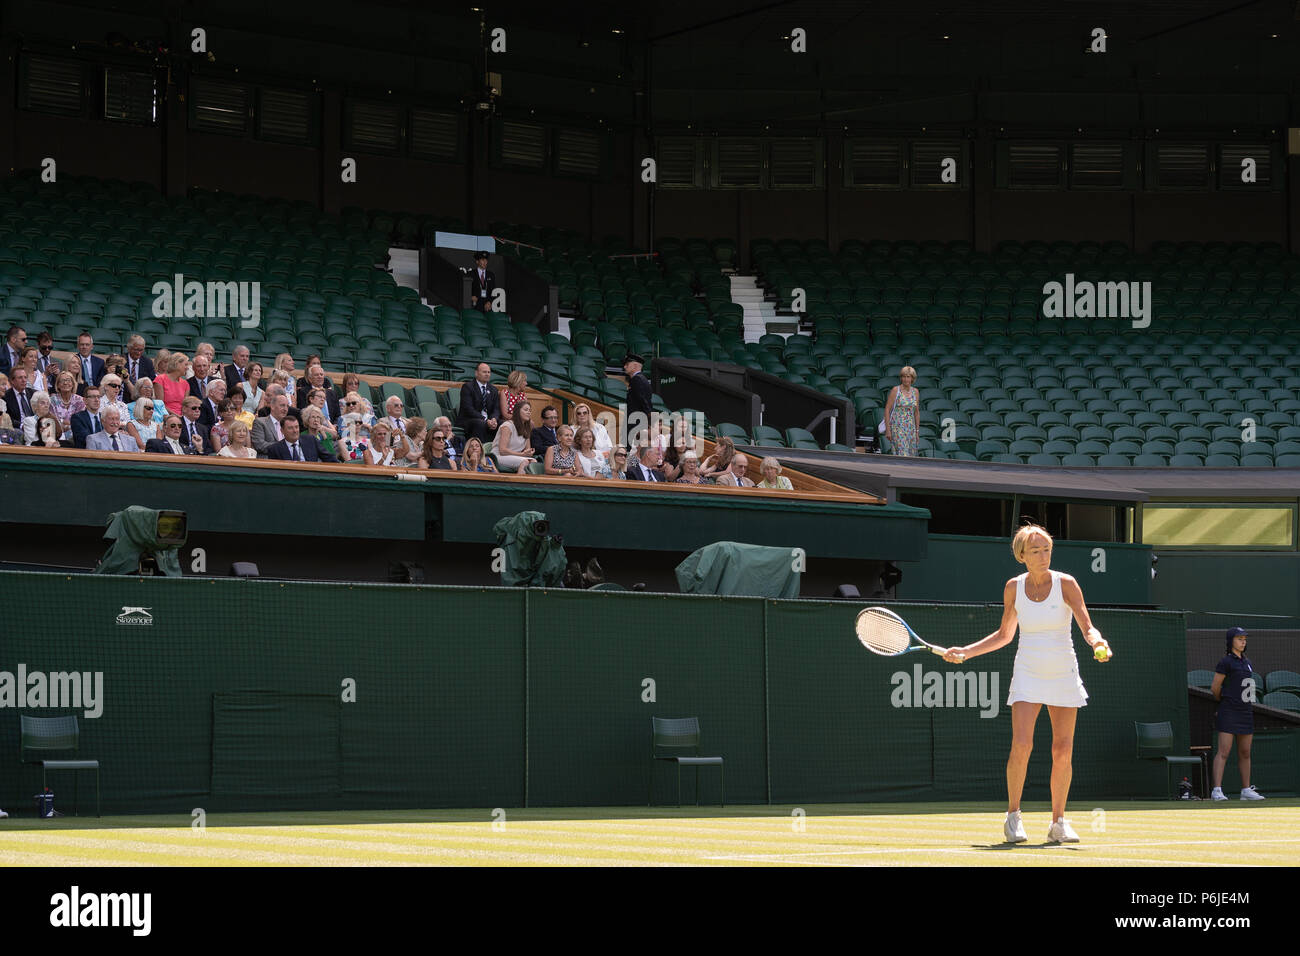 London, UK. 30 June 2018.  The Wimbledon Tennis Championships 2018 held at The All England Lawn Tennis and Croquet Club, London, England, UK.    Practice Saturday - General View - GV.  In an otherwise empty Centre Court, AELTC Members gather in the Royal Box to watch a Members' Doubles match.  This is to rehearse Royal Box procedures and tamp-down the Court. Credit: Duncan Grove/Alamy Live News Stock Photo